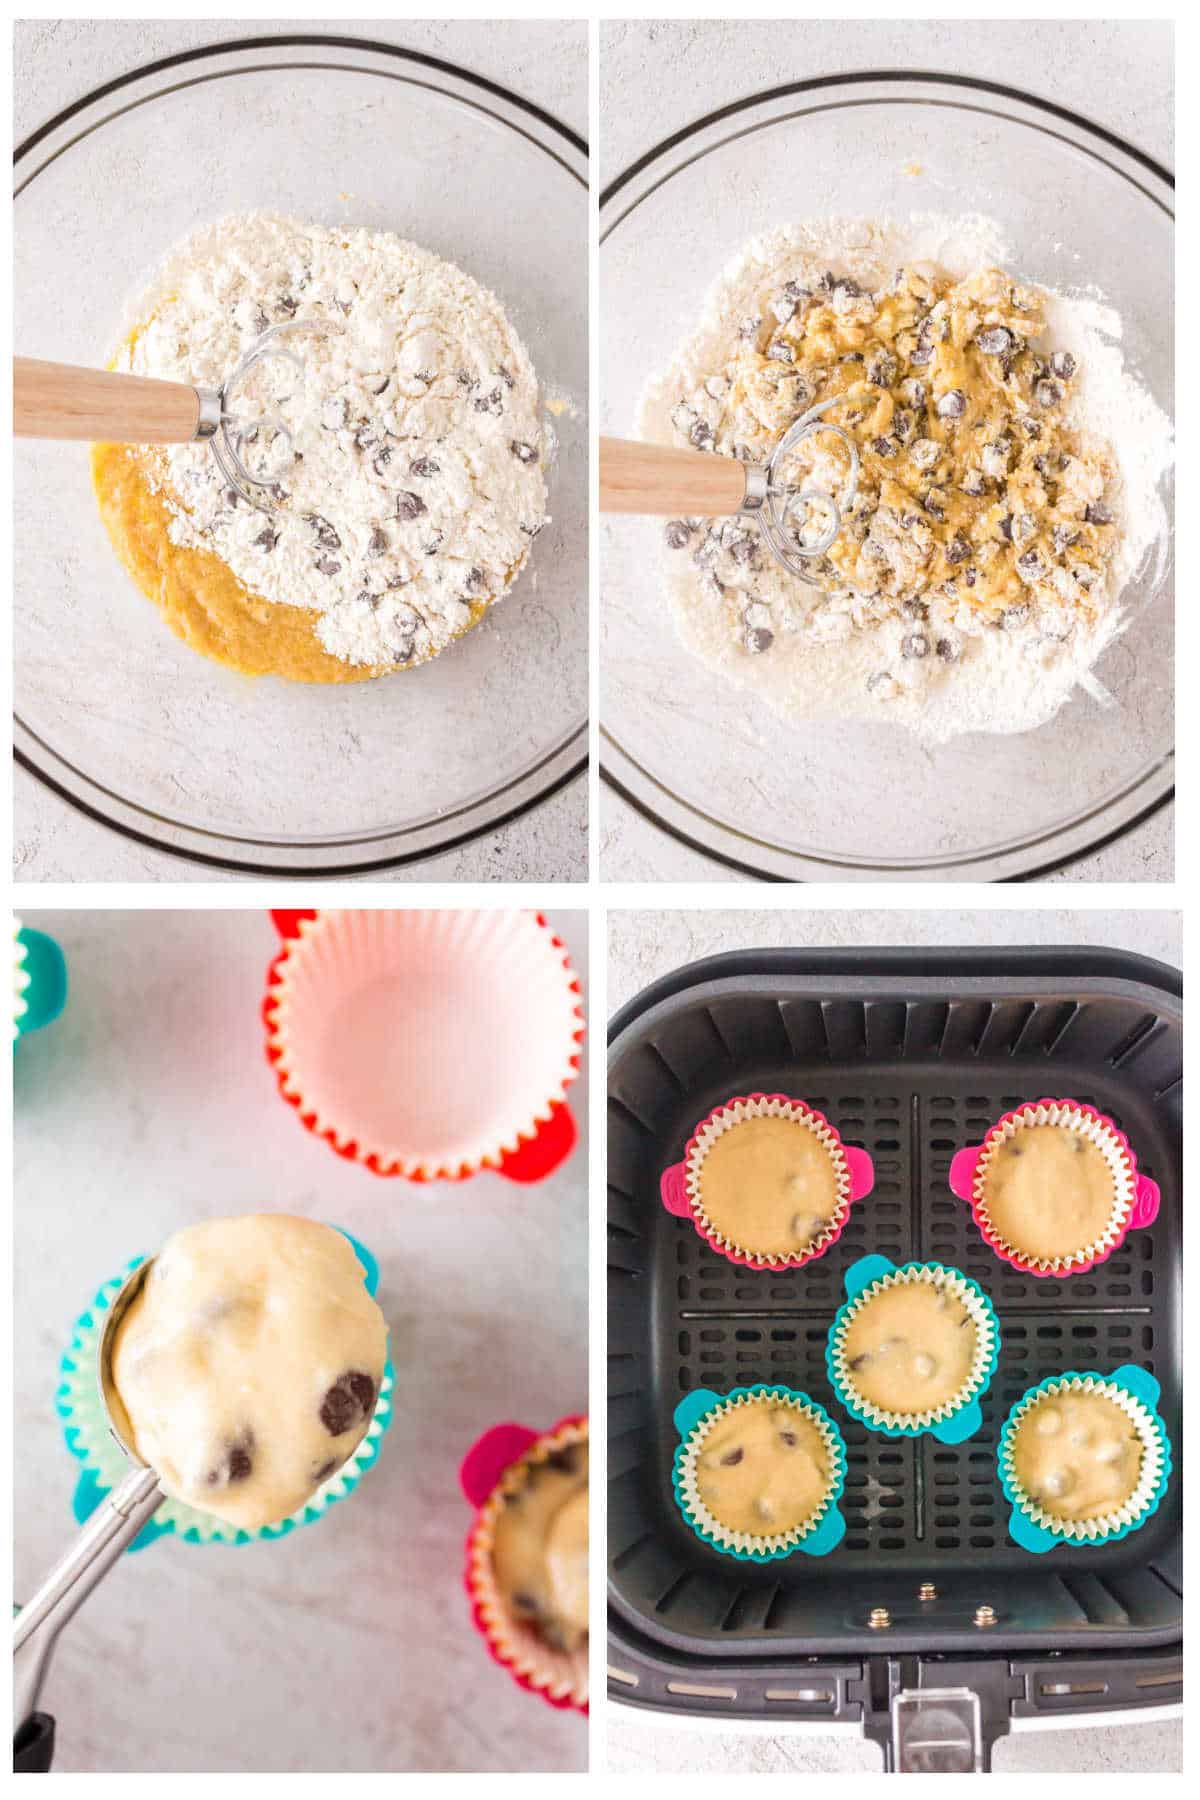 Step by step images showing how to make air fryer chocolate chip muffins.